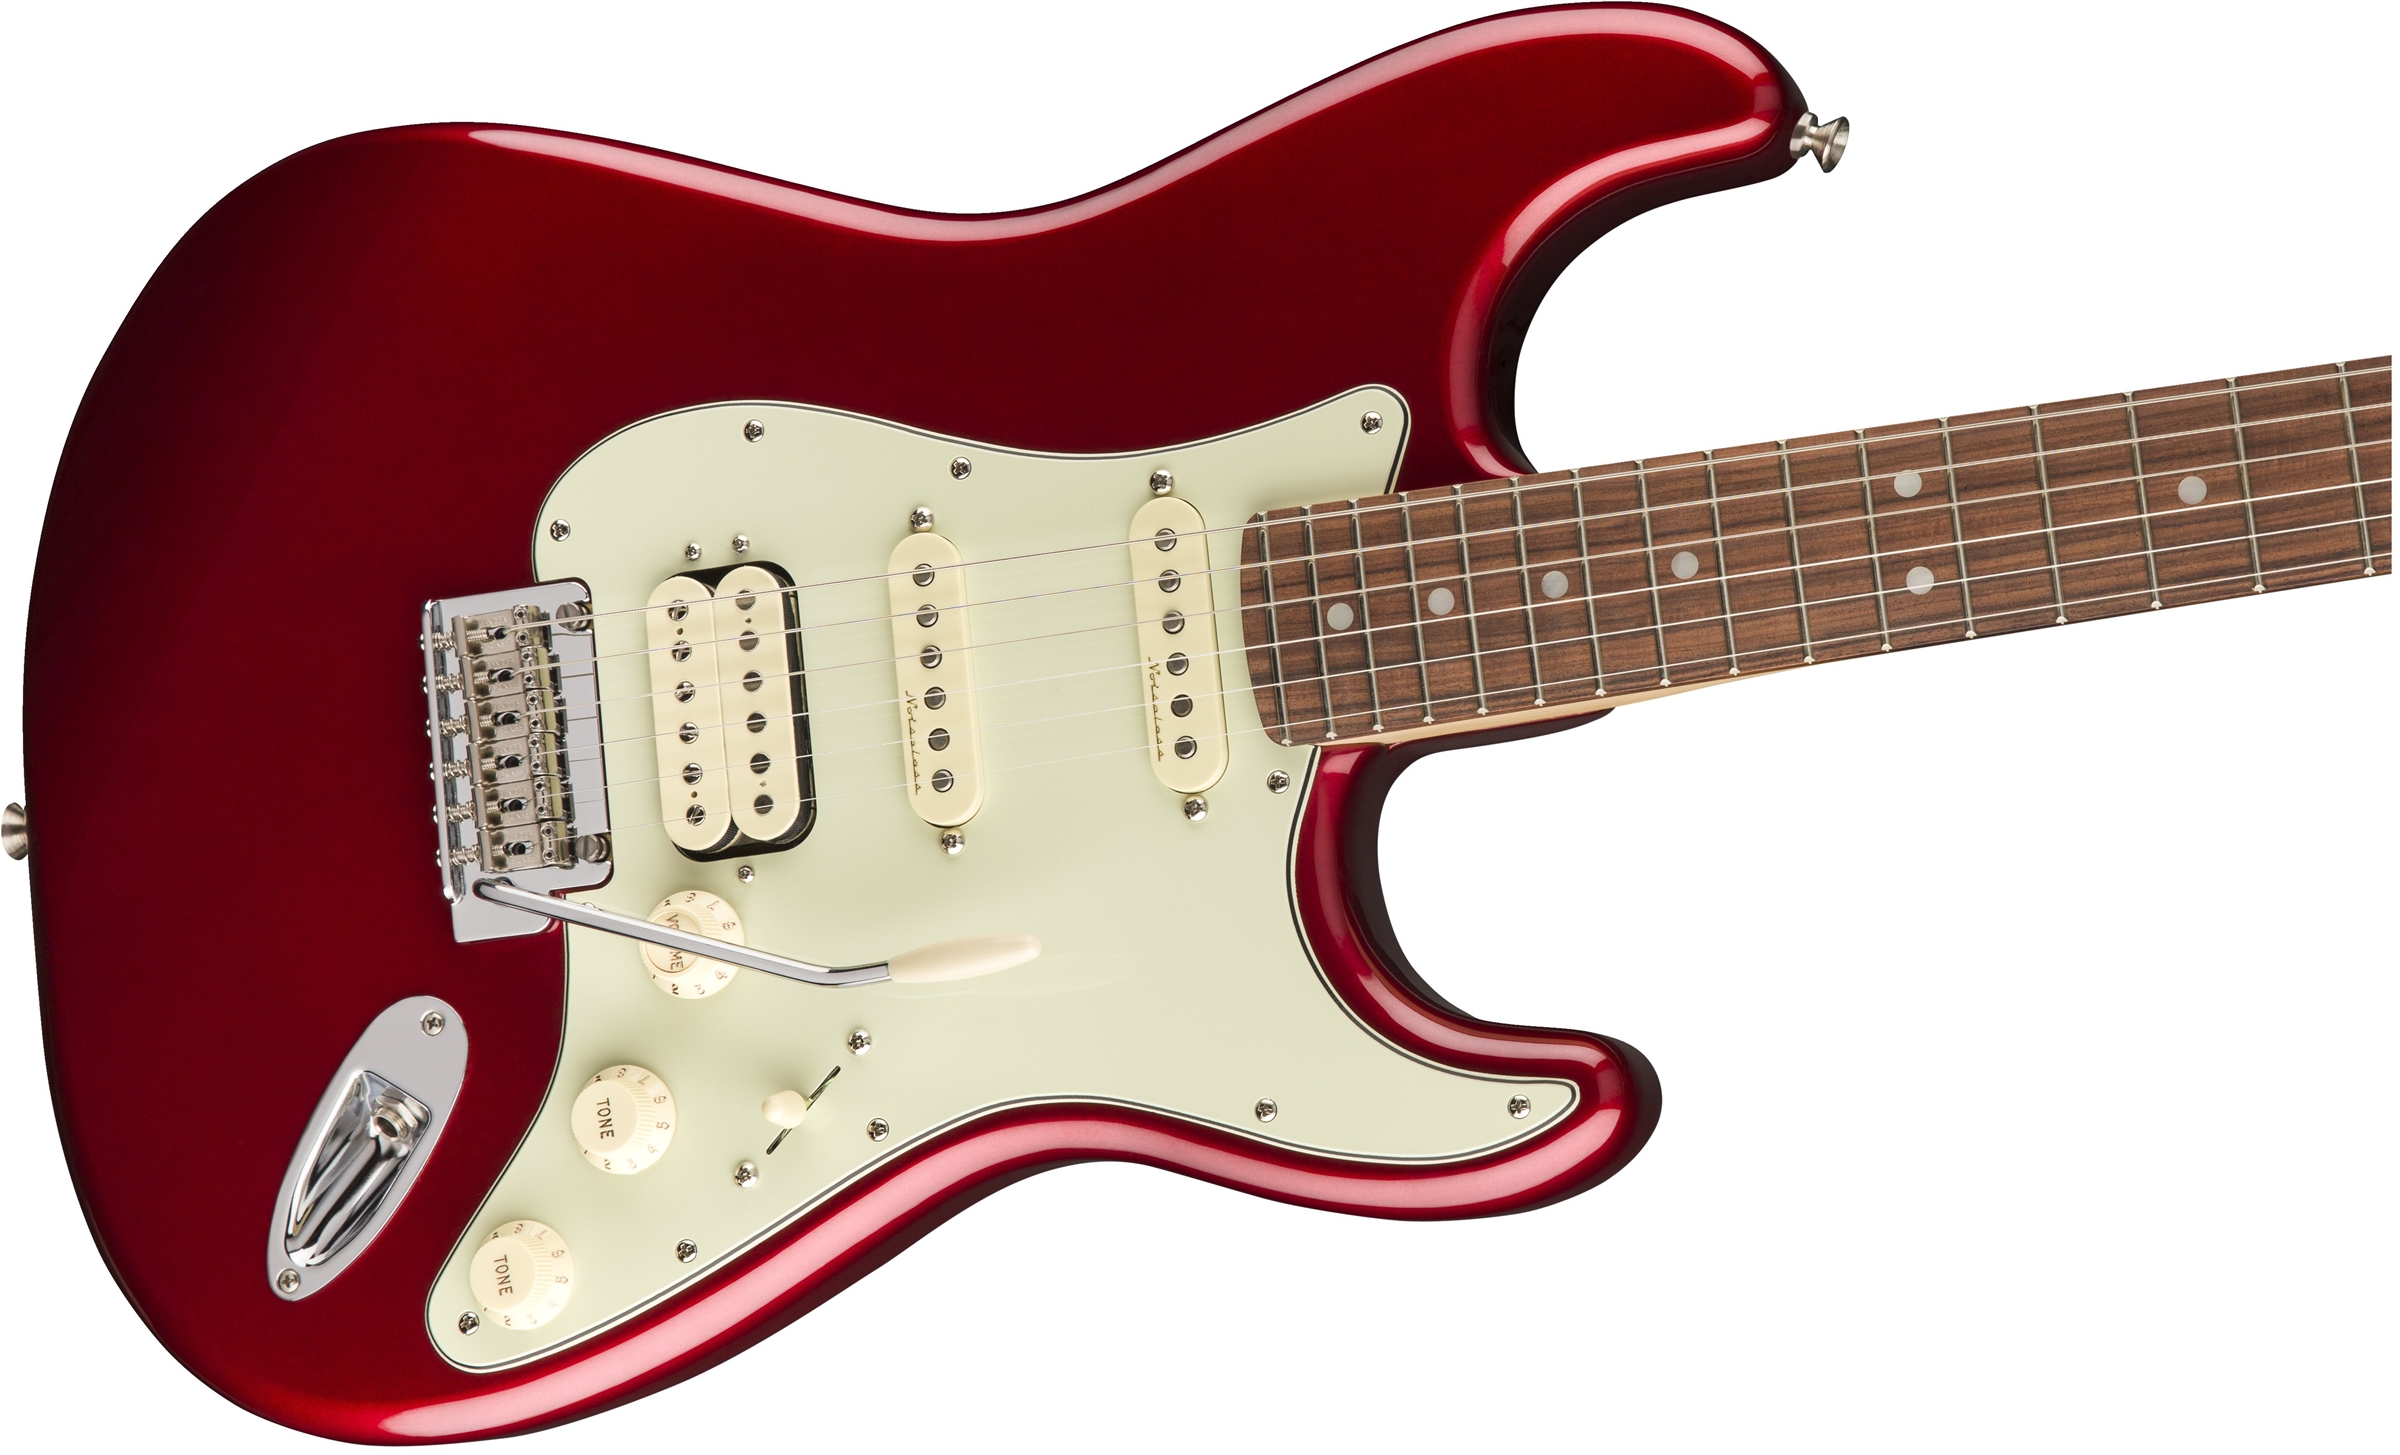 Fender Strat Deluxe Hss Mex Pf 2017 - Candy Apple Red - Str shape electric guitar - Variation 2